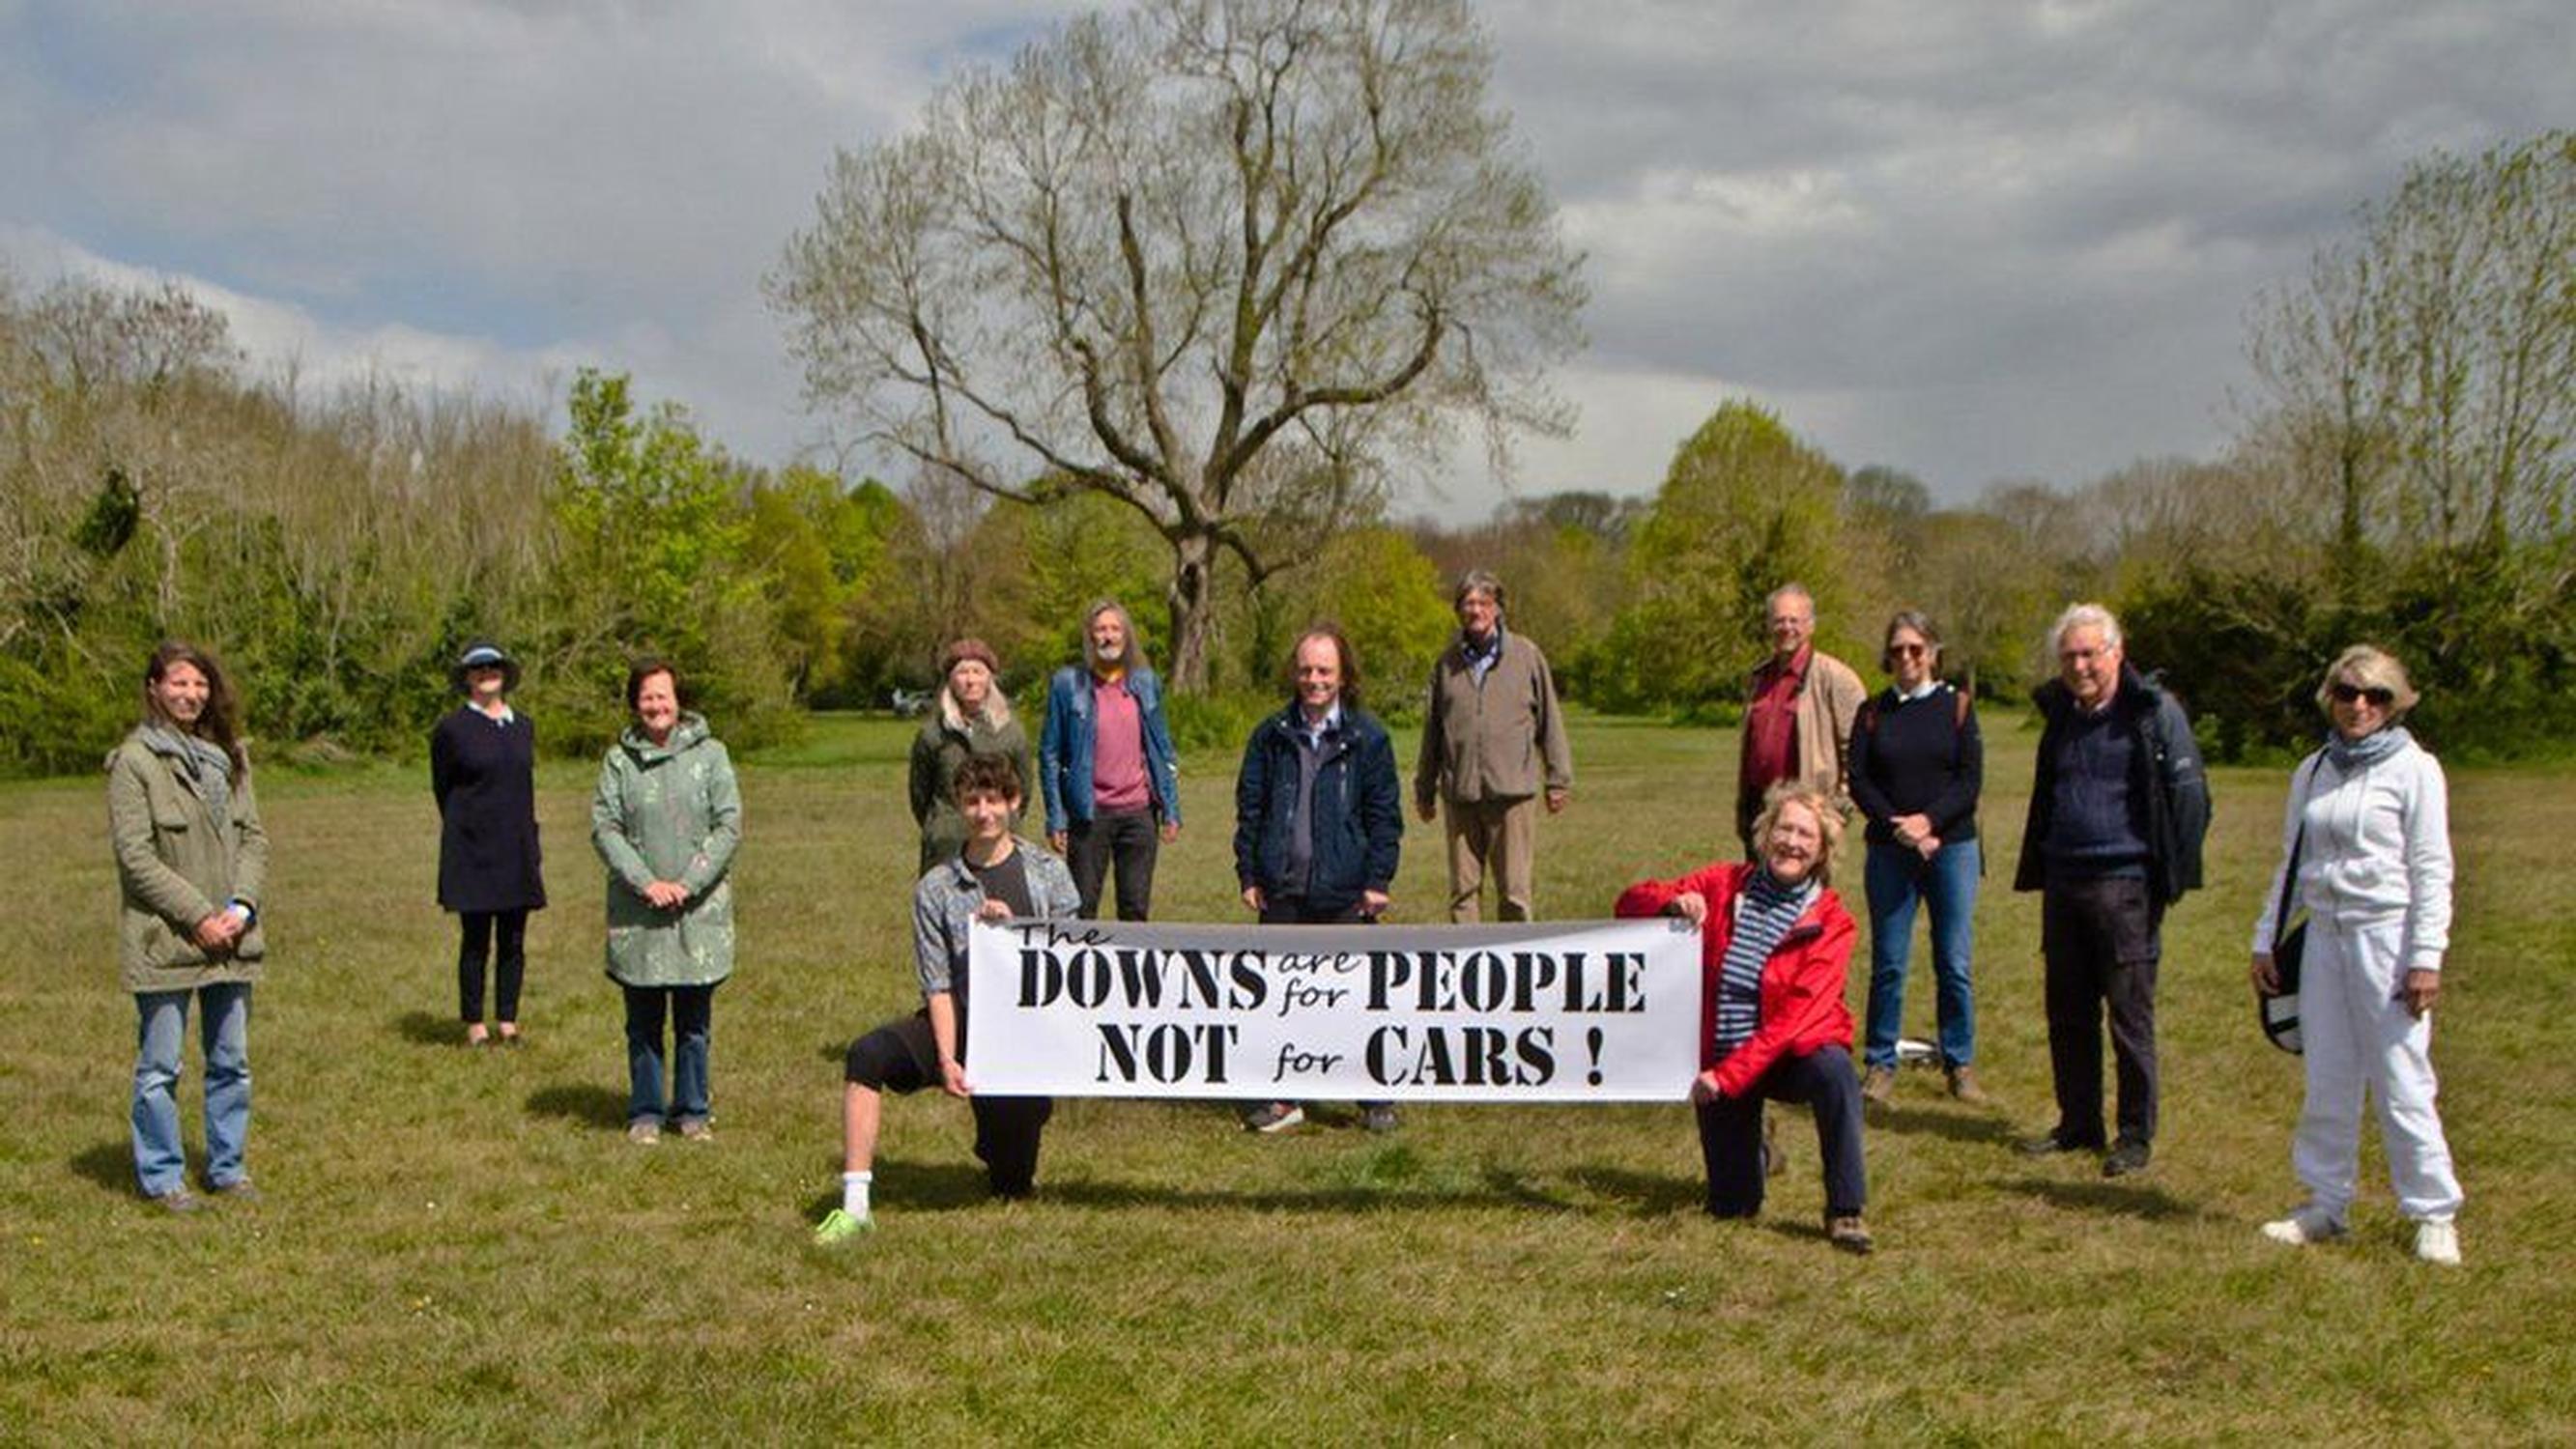 The Downs for People (DfP) campaign group